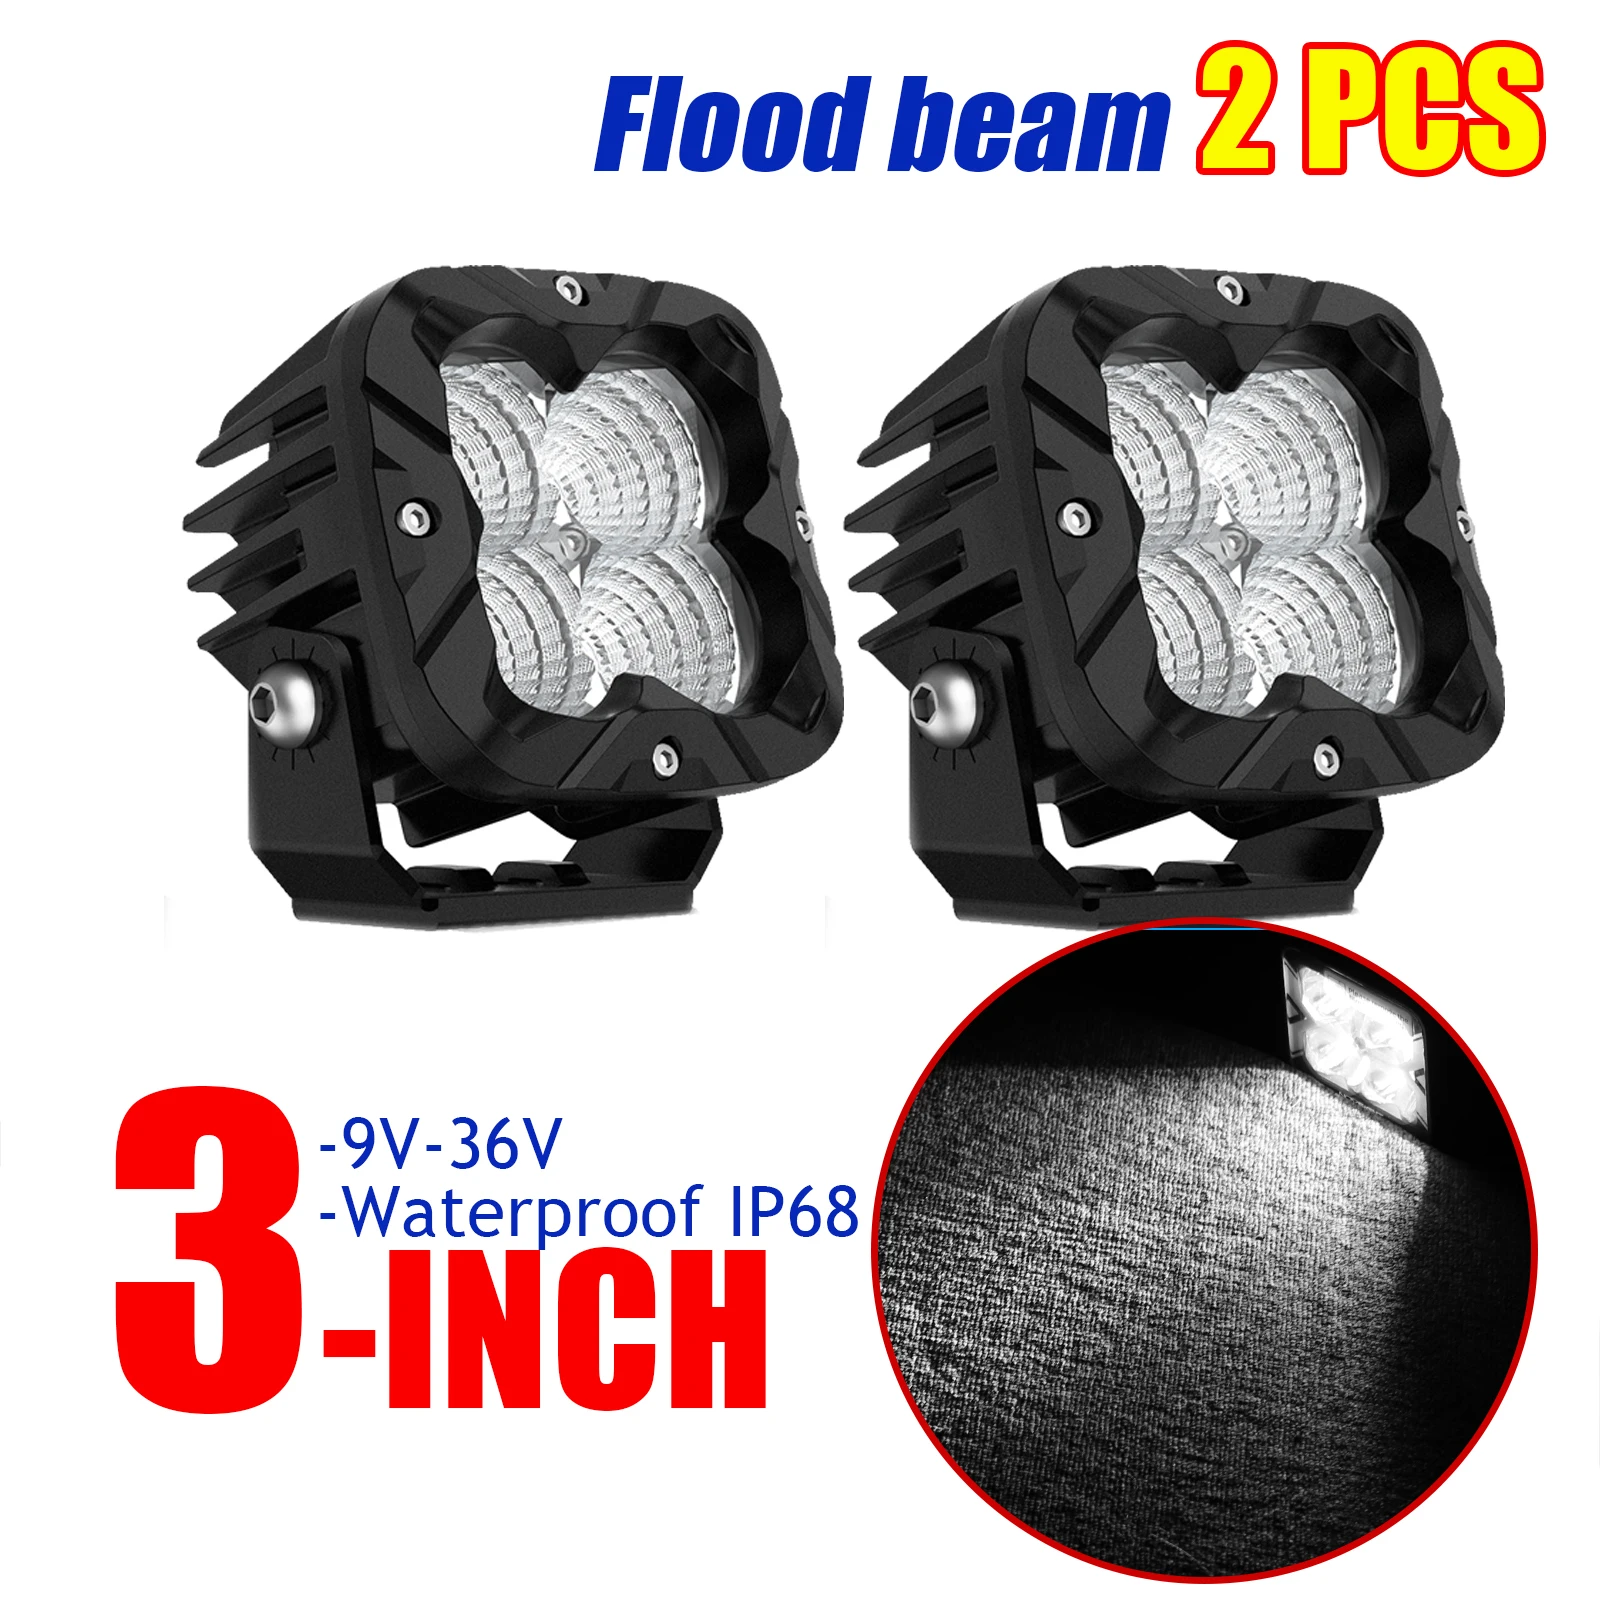 

3inch 24W 2560LM 6000K Dual ROW Led Pod Work Light Bar Flood Beam Driving Lamp For Offroad Boat Tracktor Truck SUV ATV